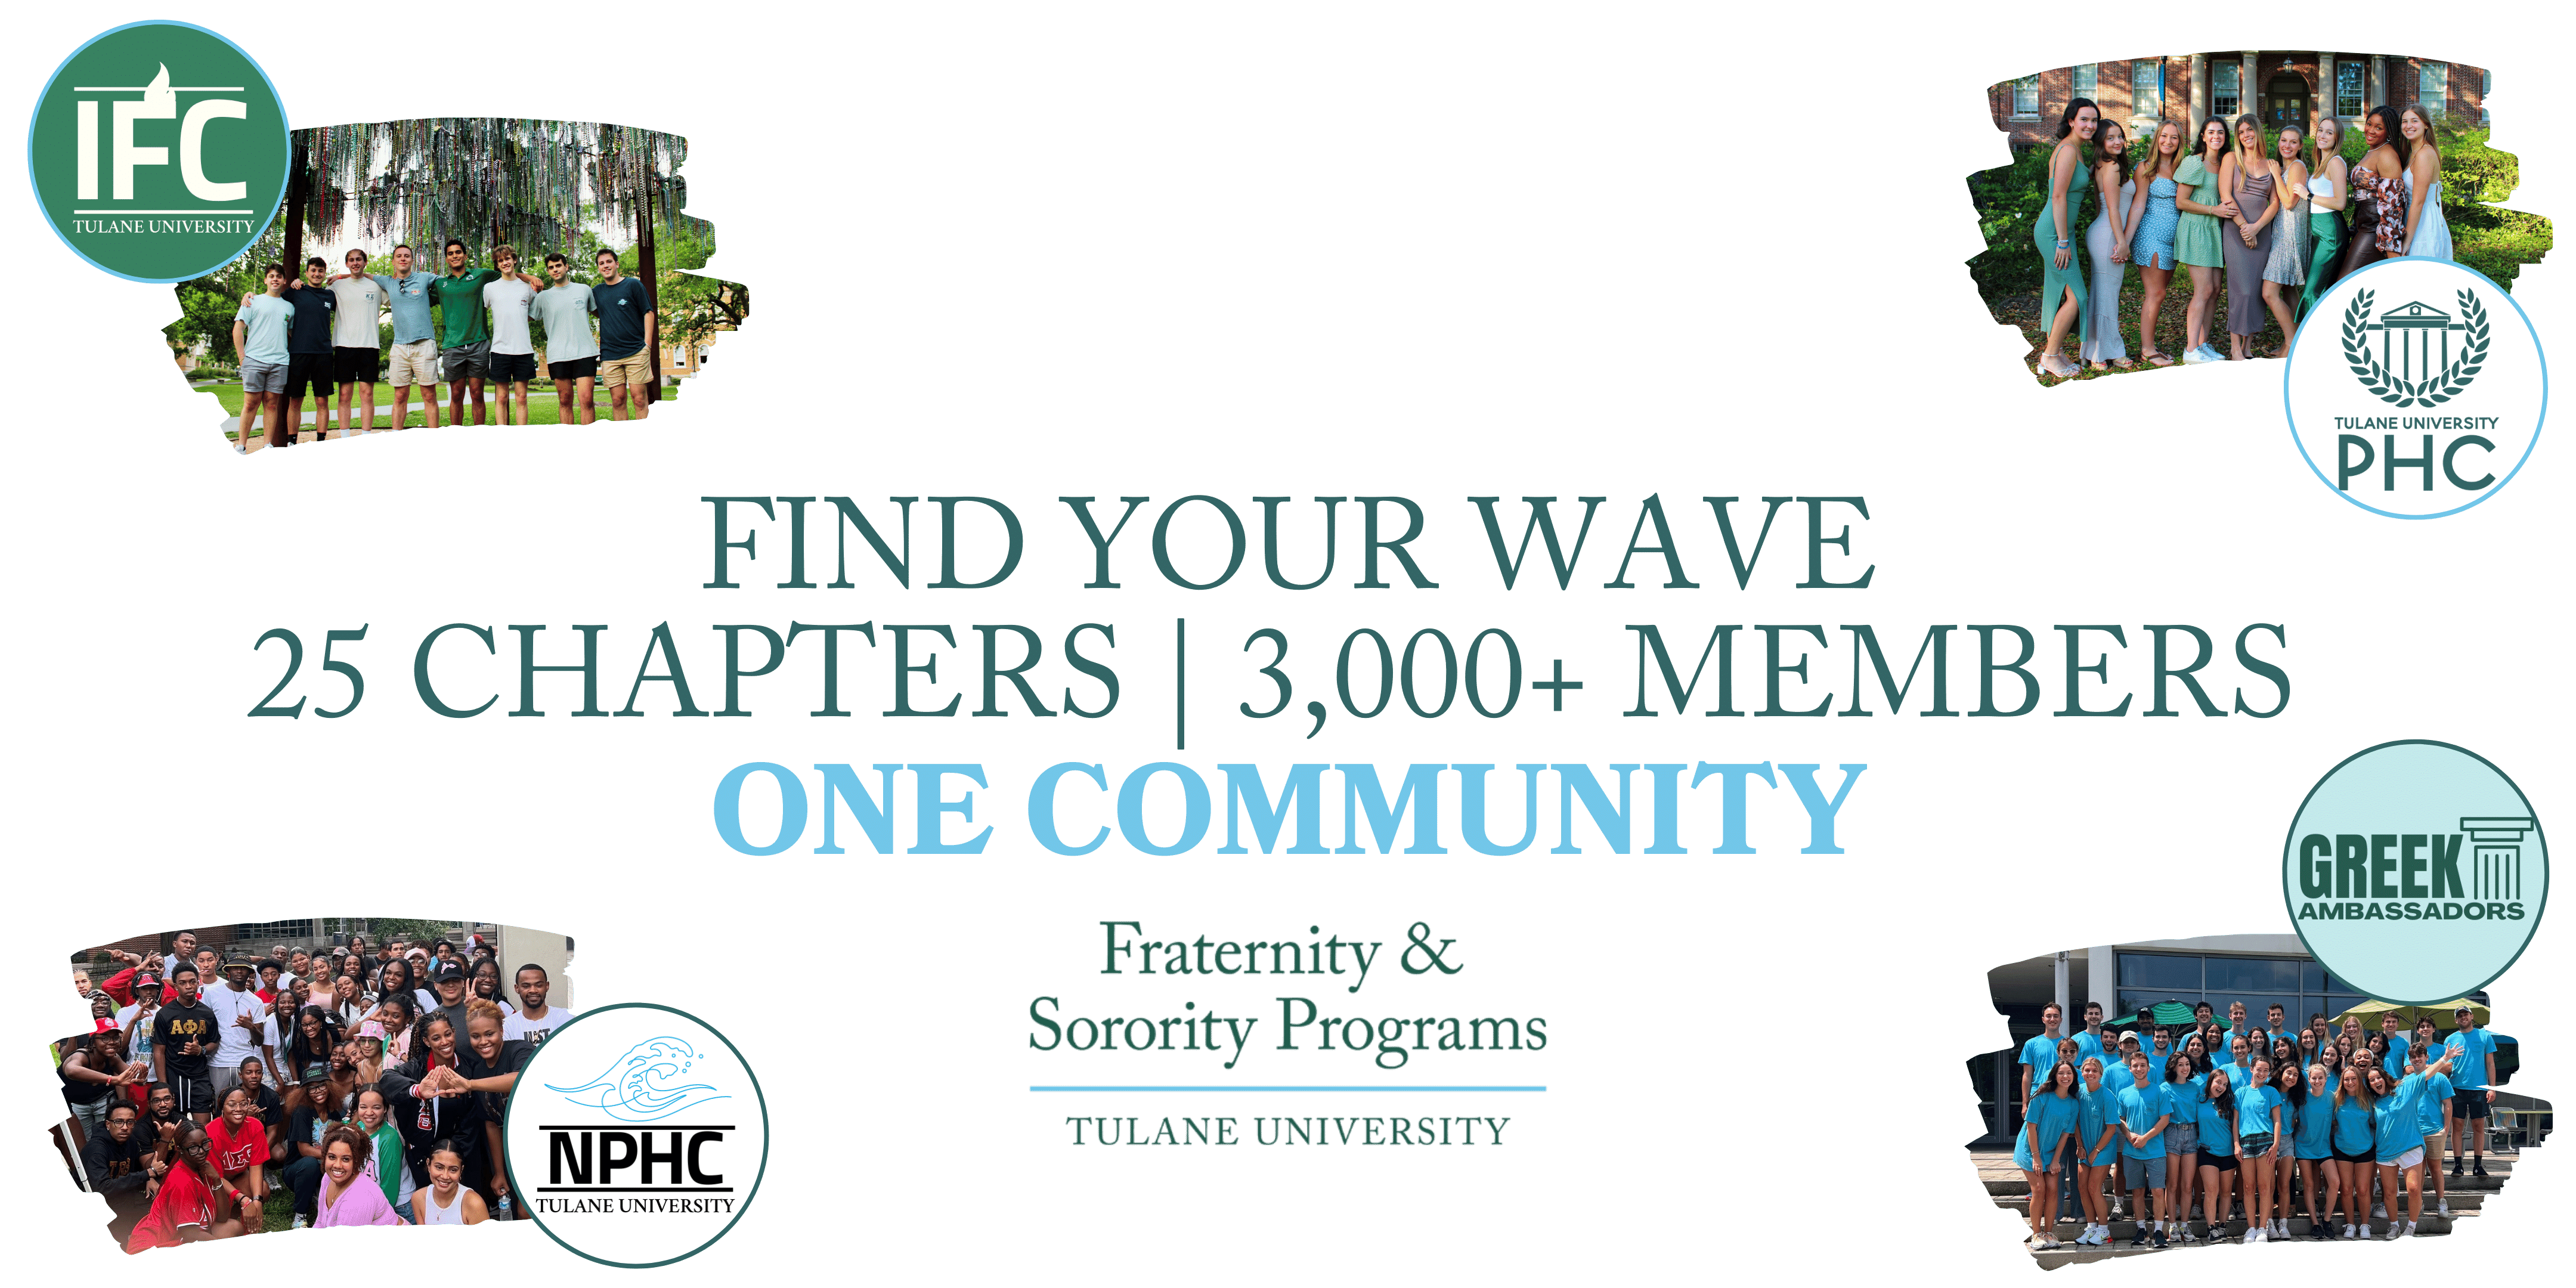 Find Your Wave with Tulane Fraternities & Sororities! tulane